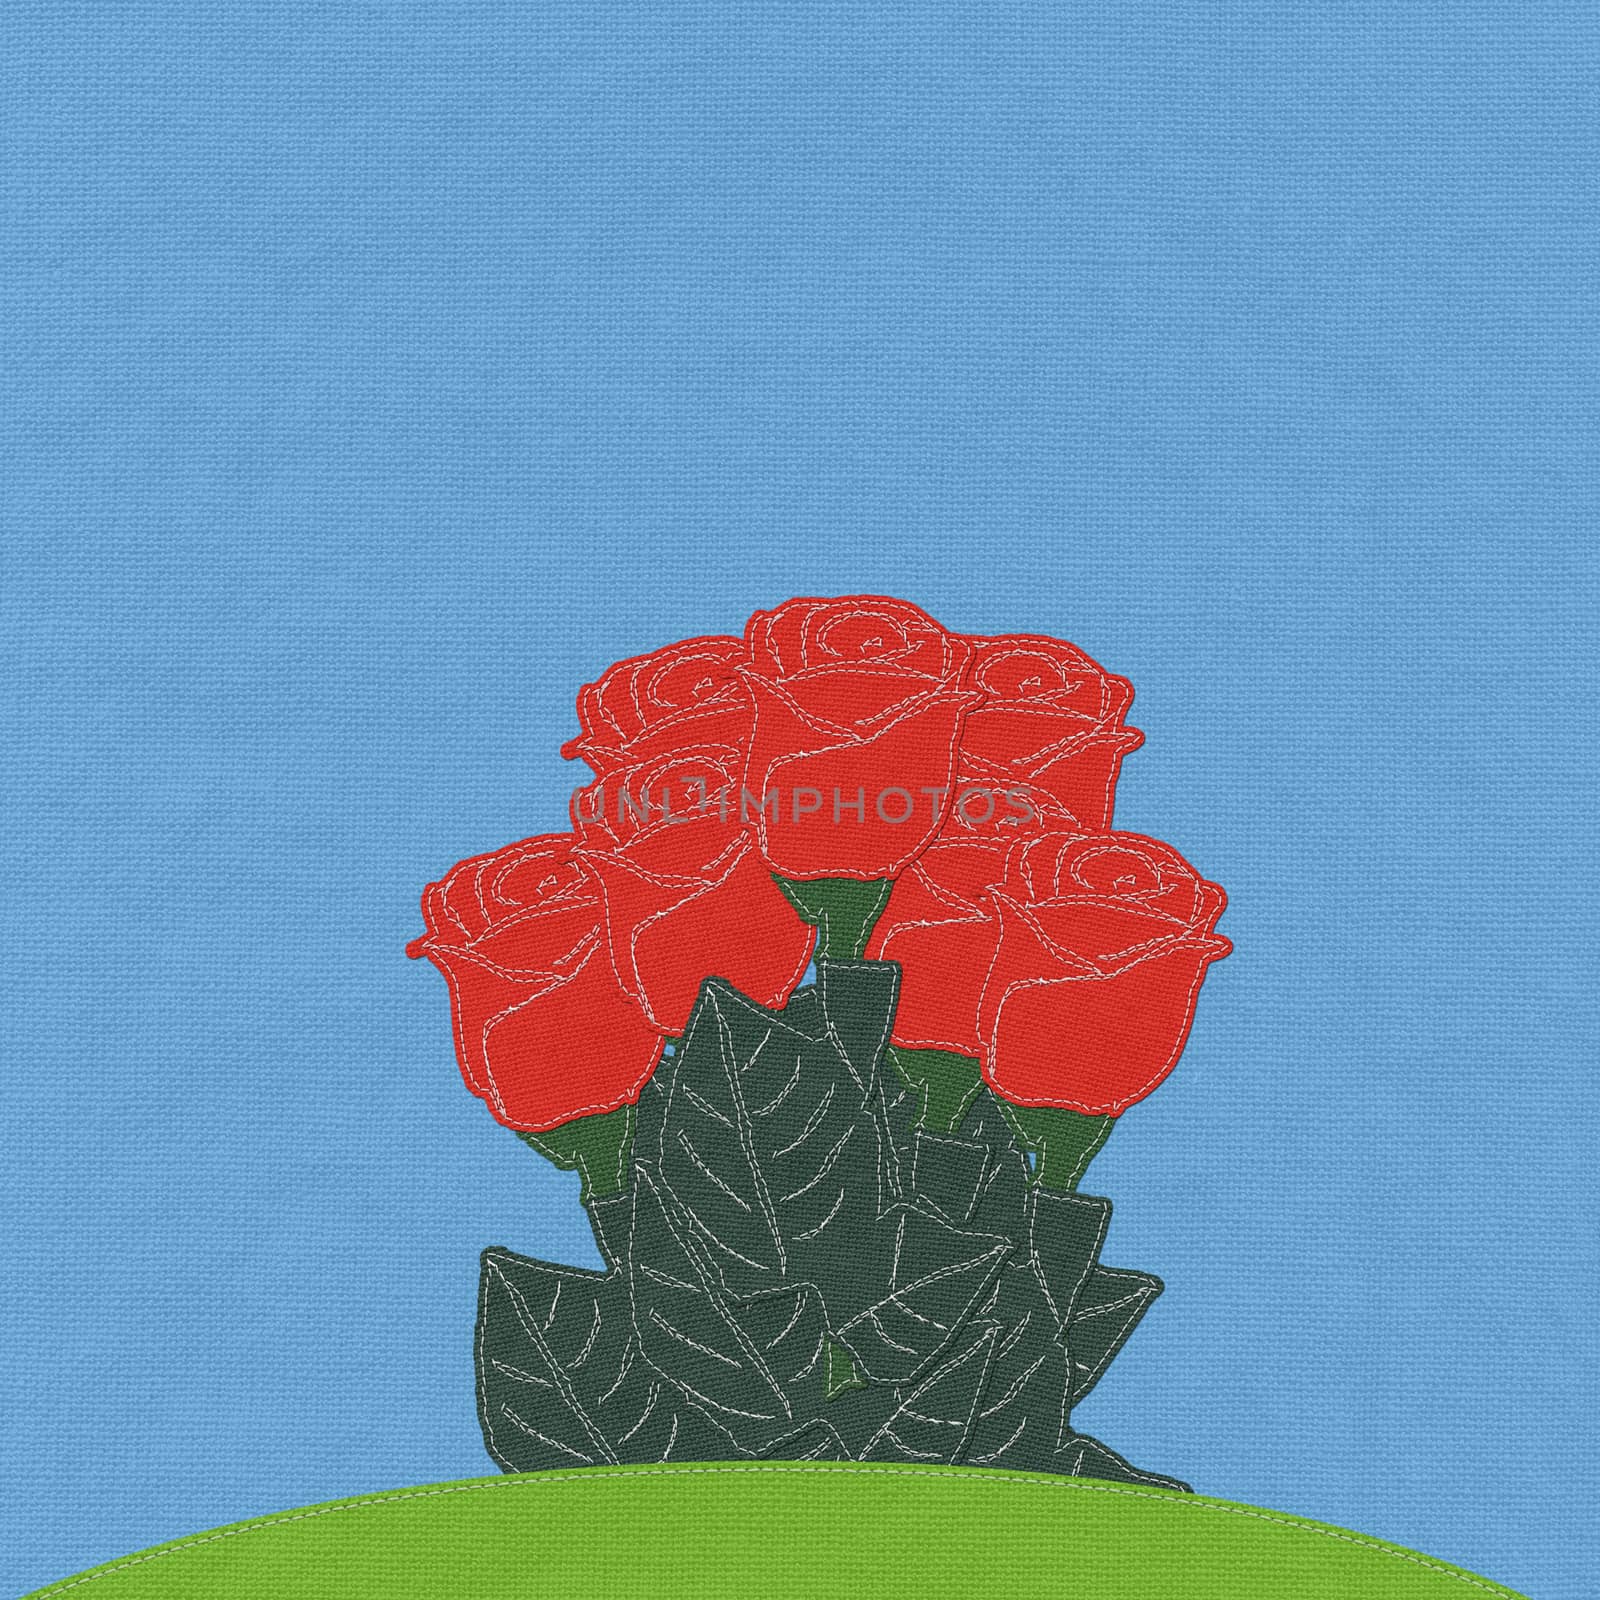 Red rose on green grass field with stitch style fabric background